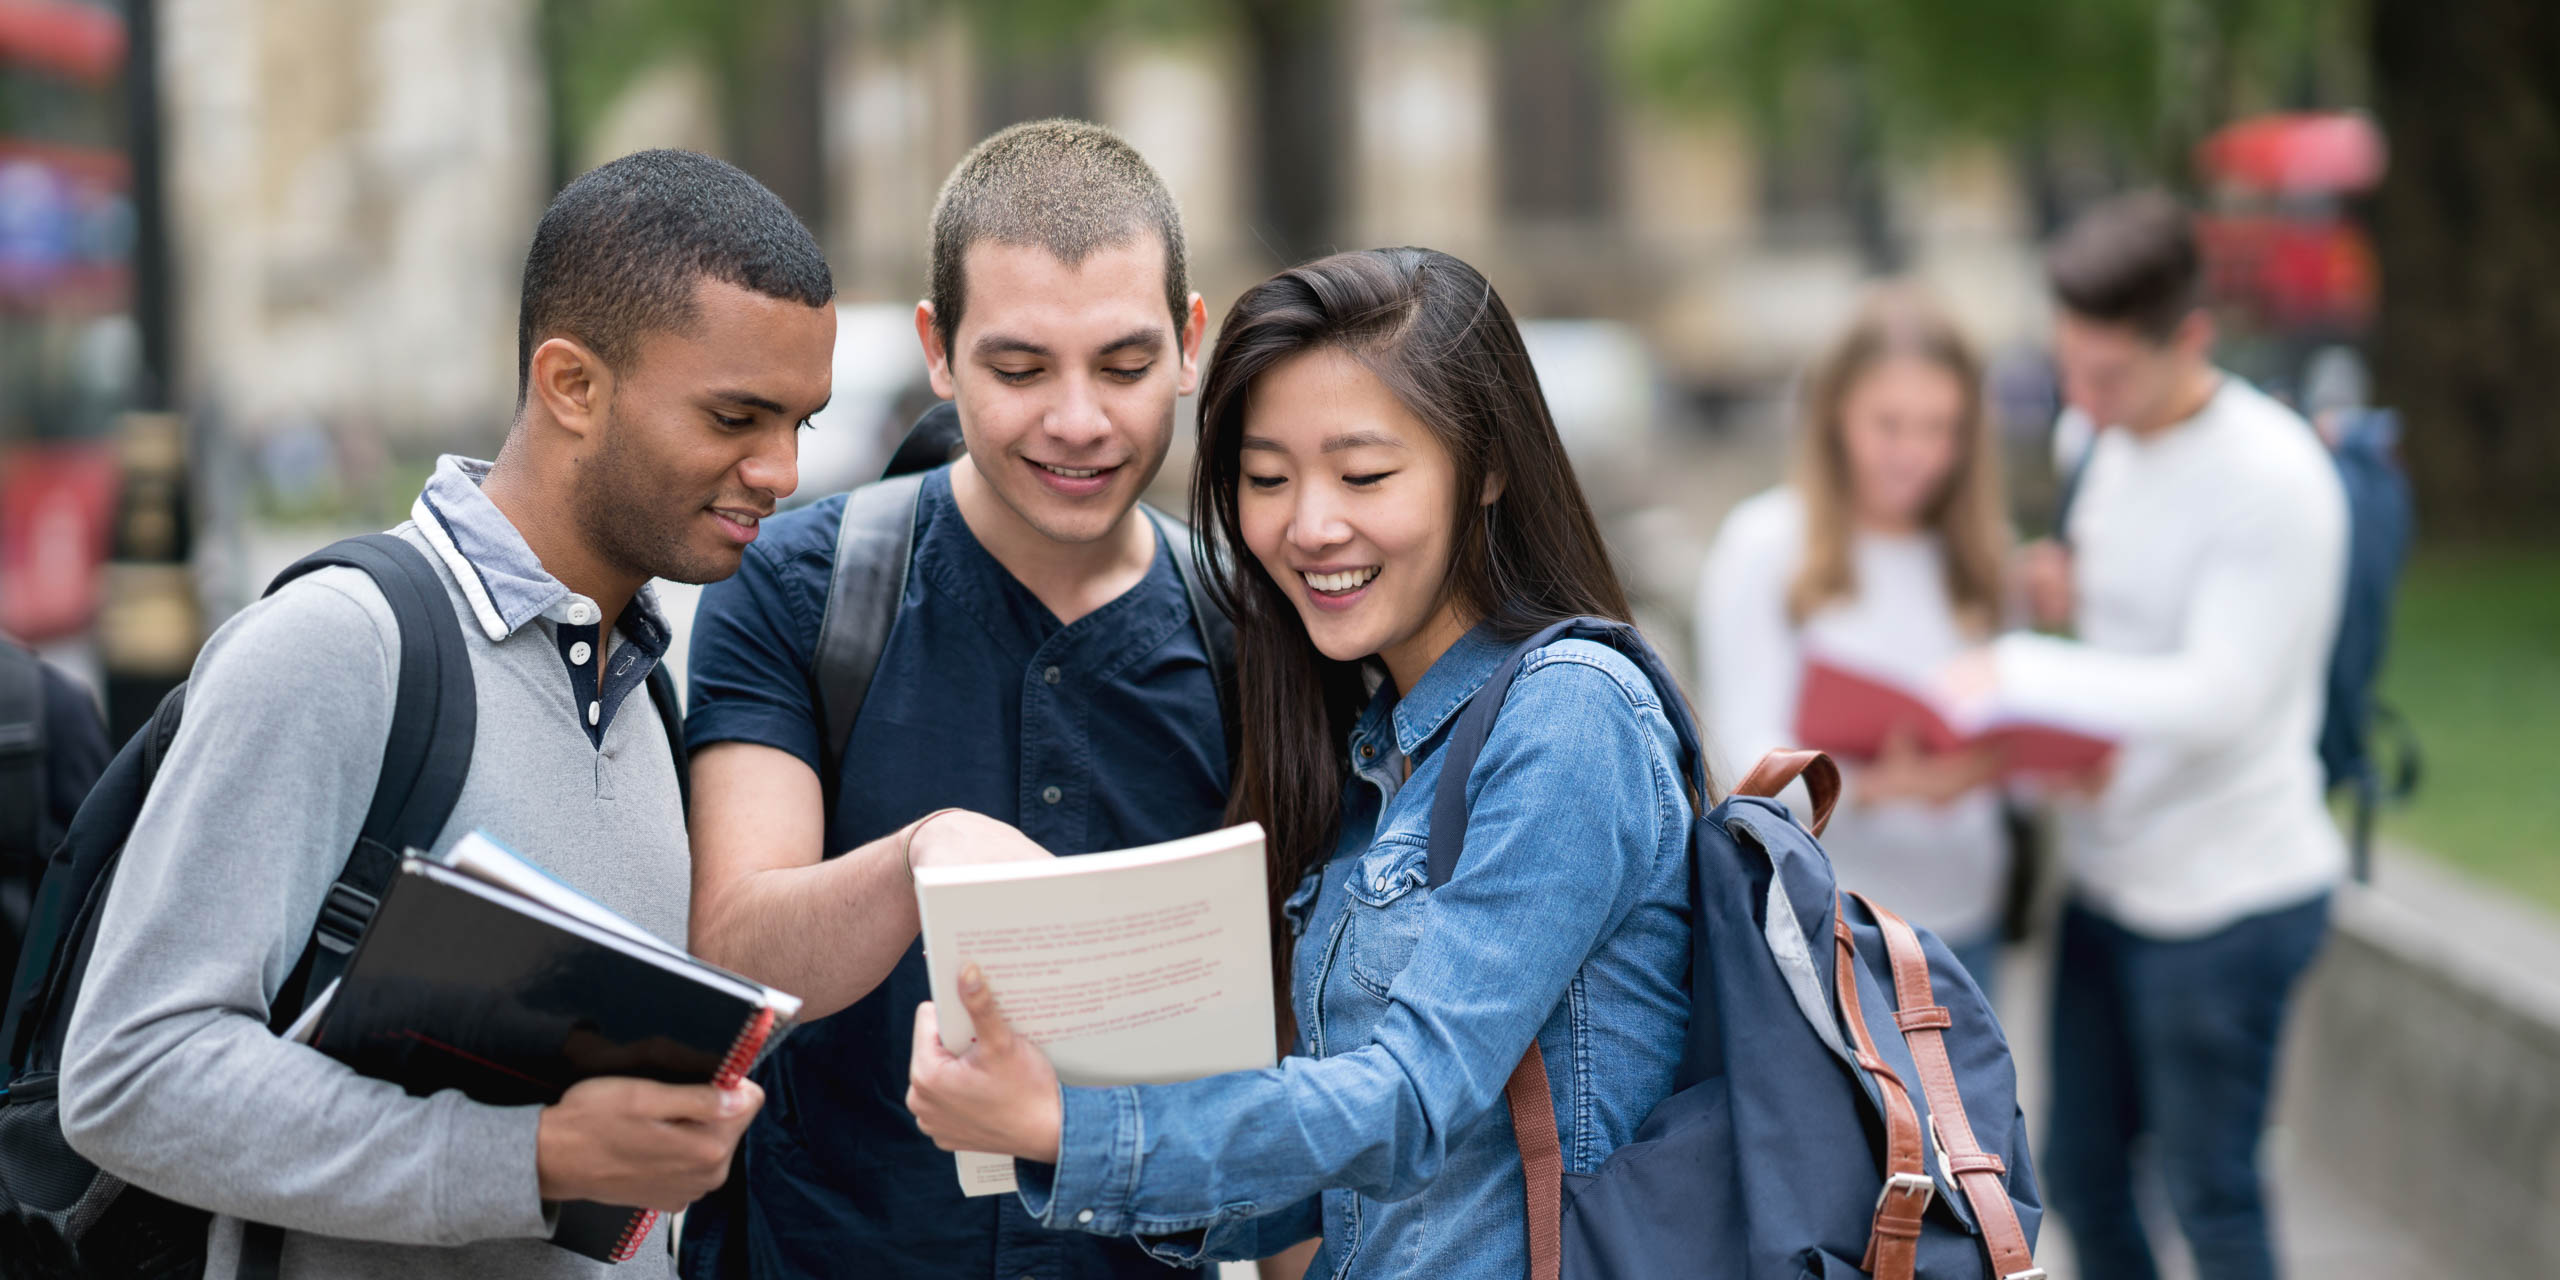 5 Tips for Students Planning to Study Abroad